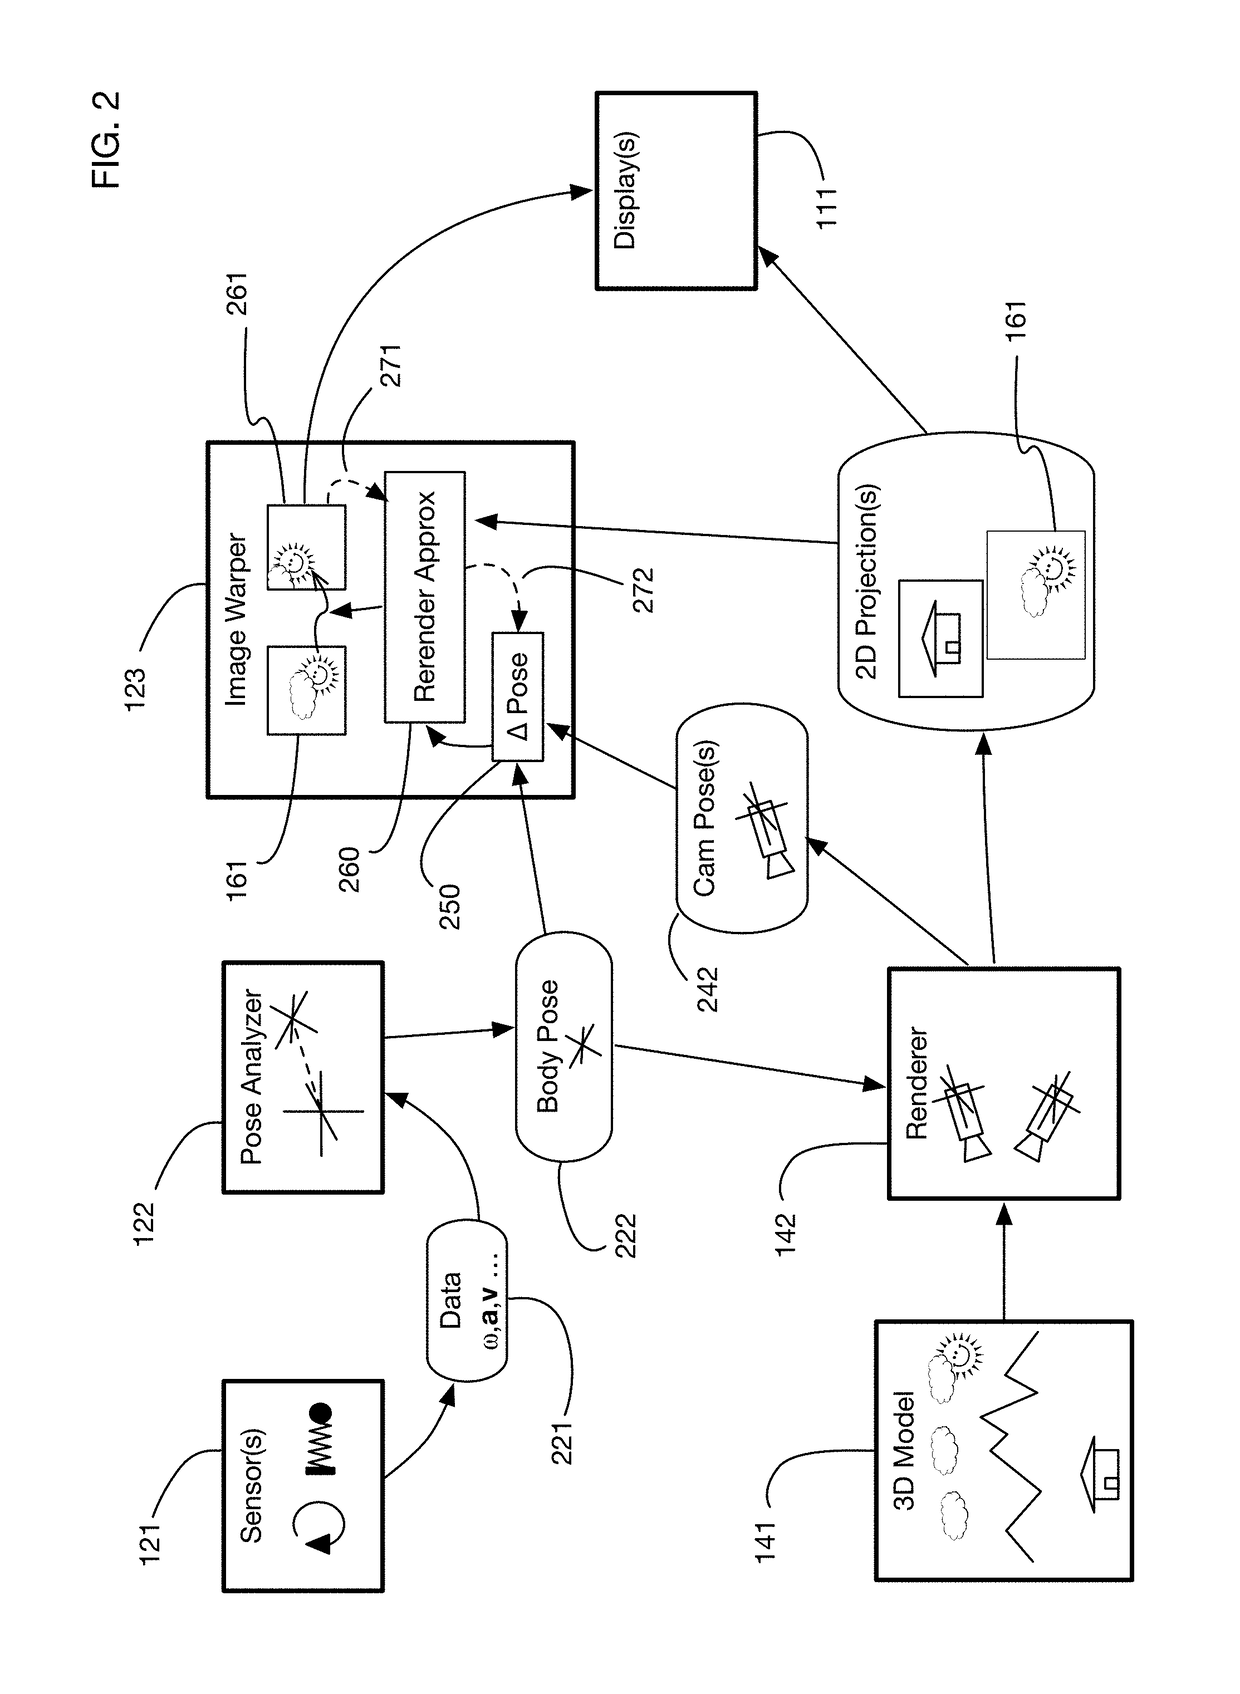 Predictive virtual reality display system with post rendering correction